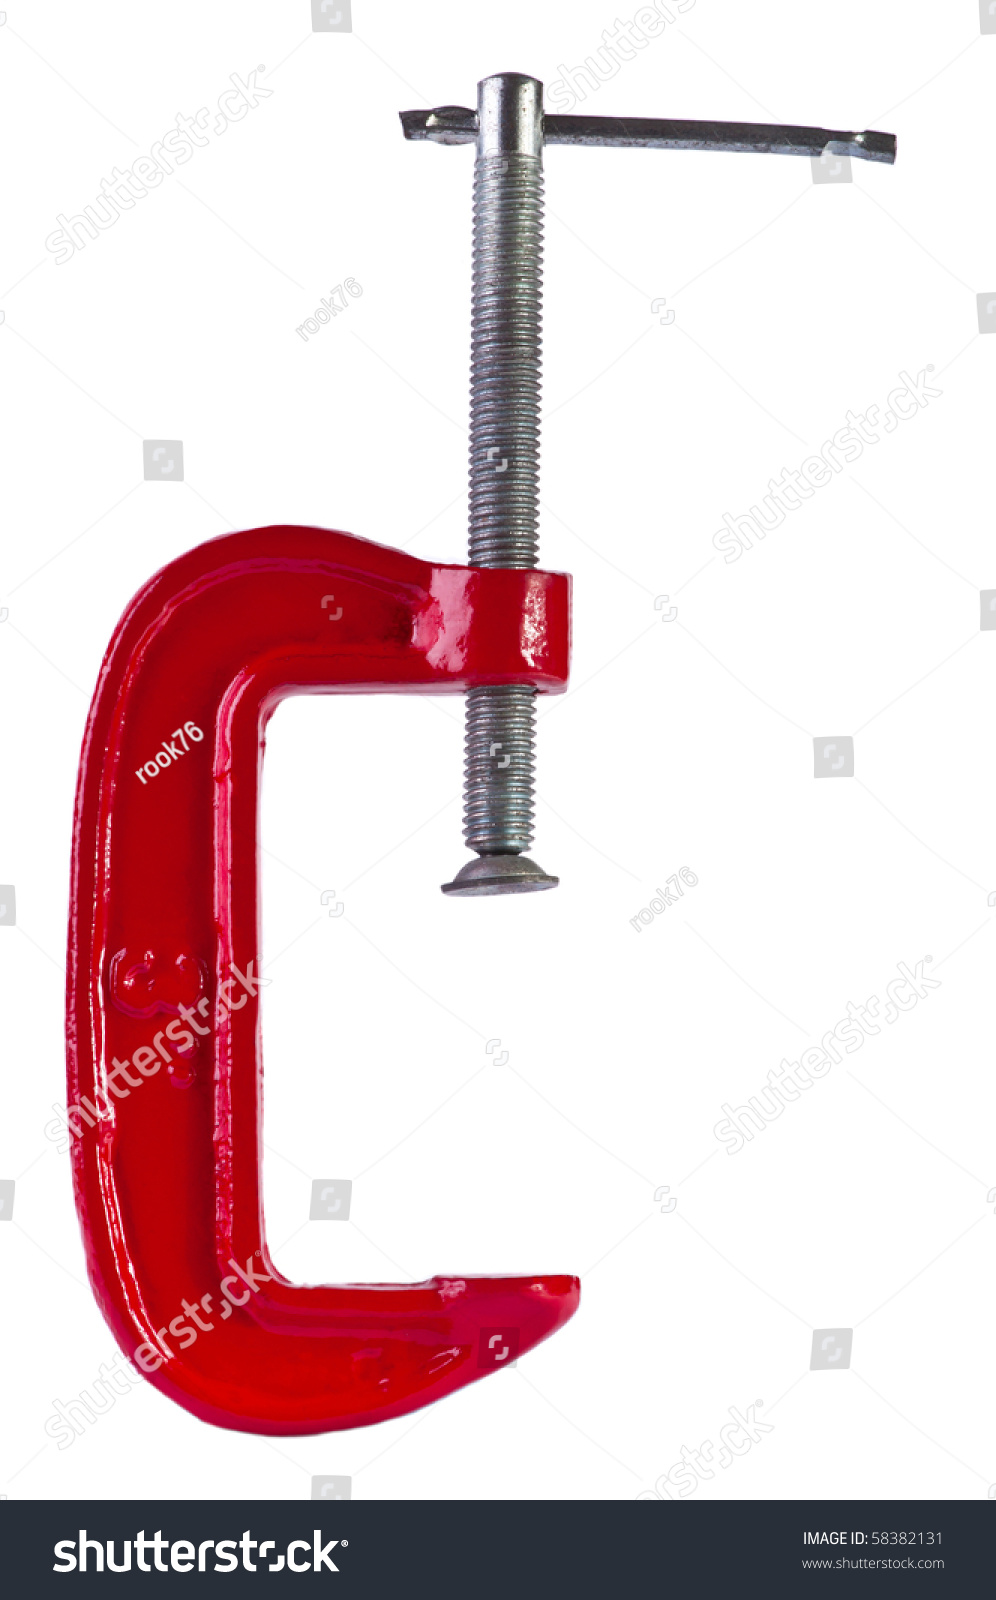 stock-photo-a-small-red-vise-isolated-on-white-old-metal-vice-58382131.jpg